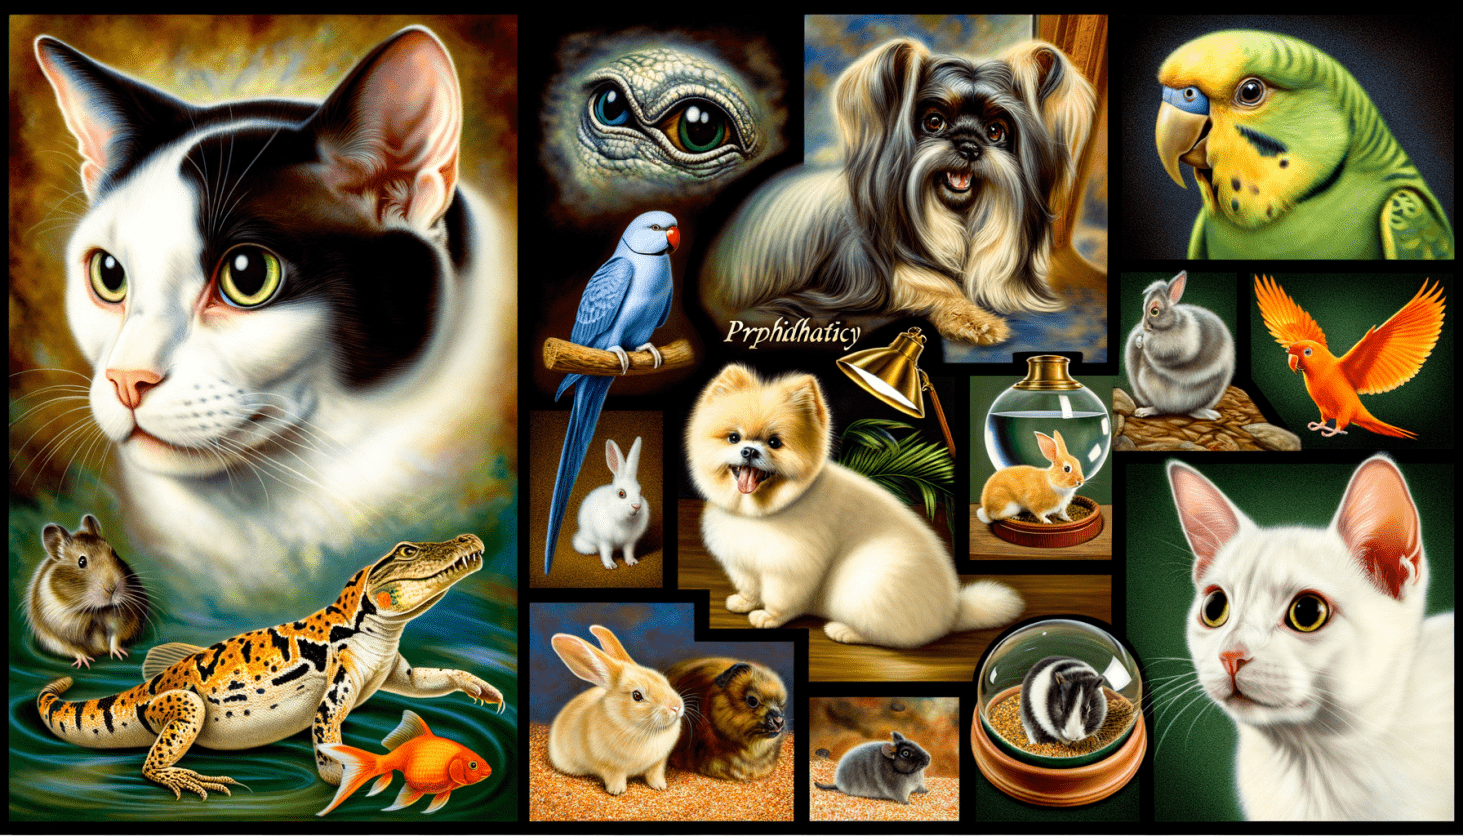 A collage of various pet expressions and body language cues.